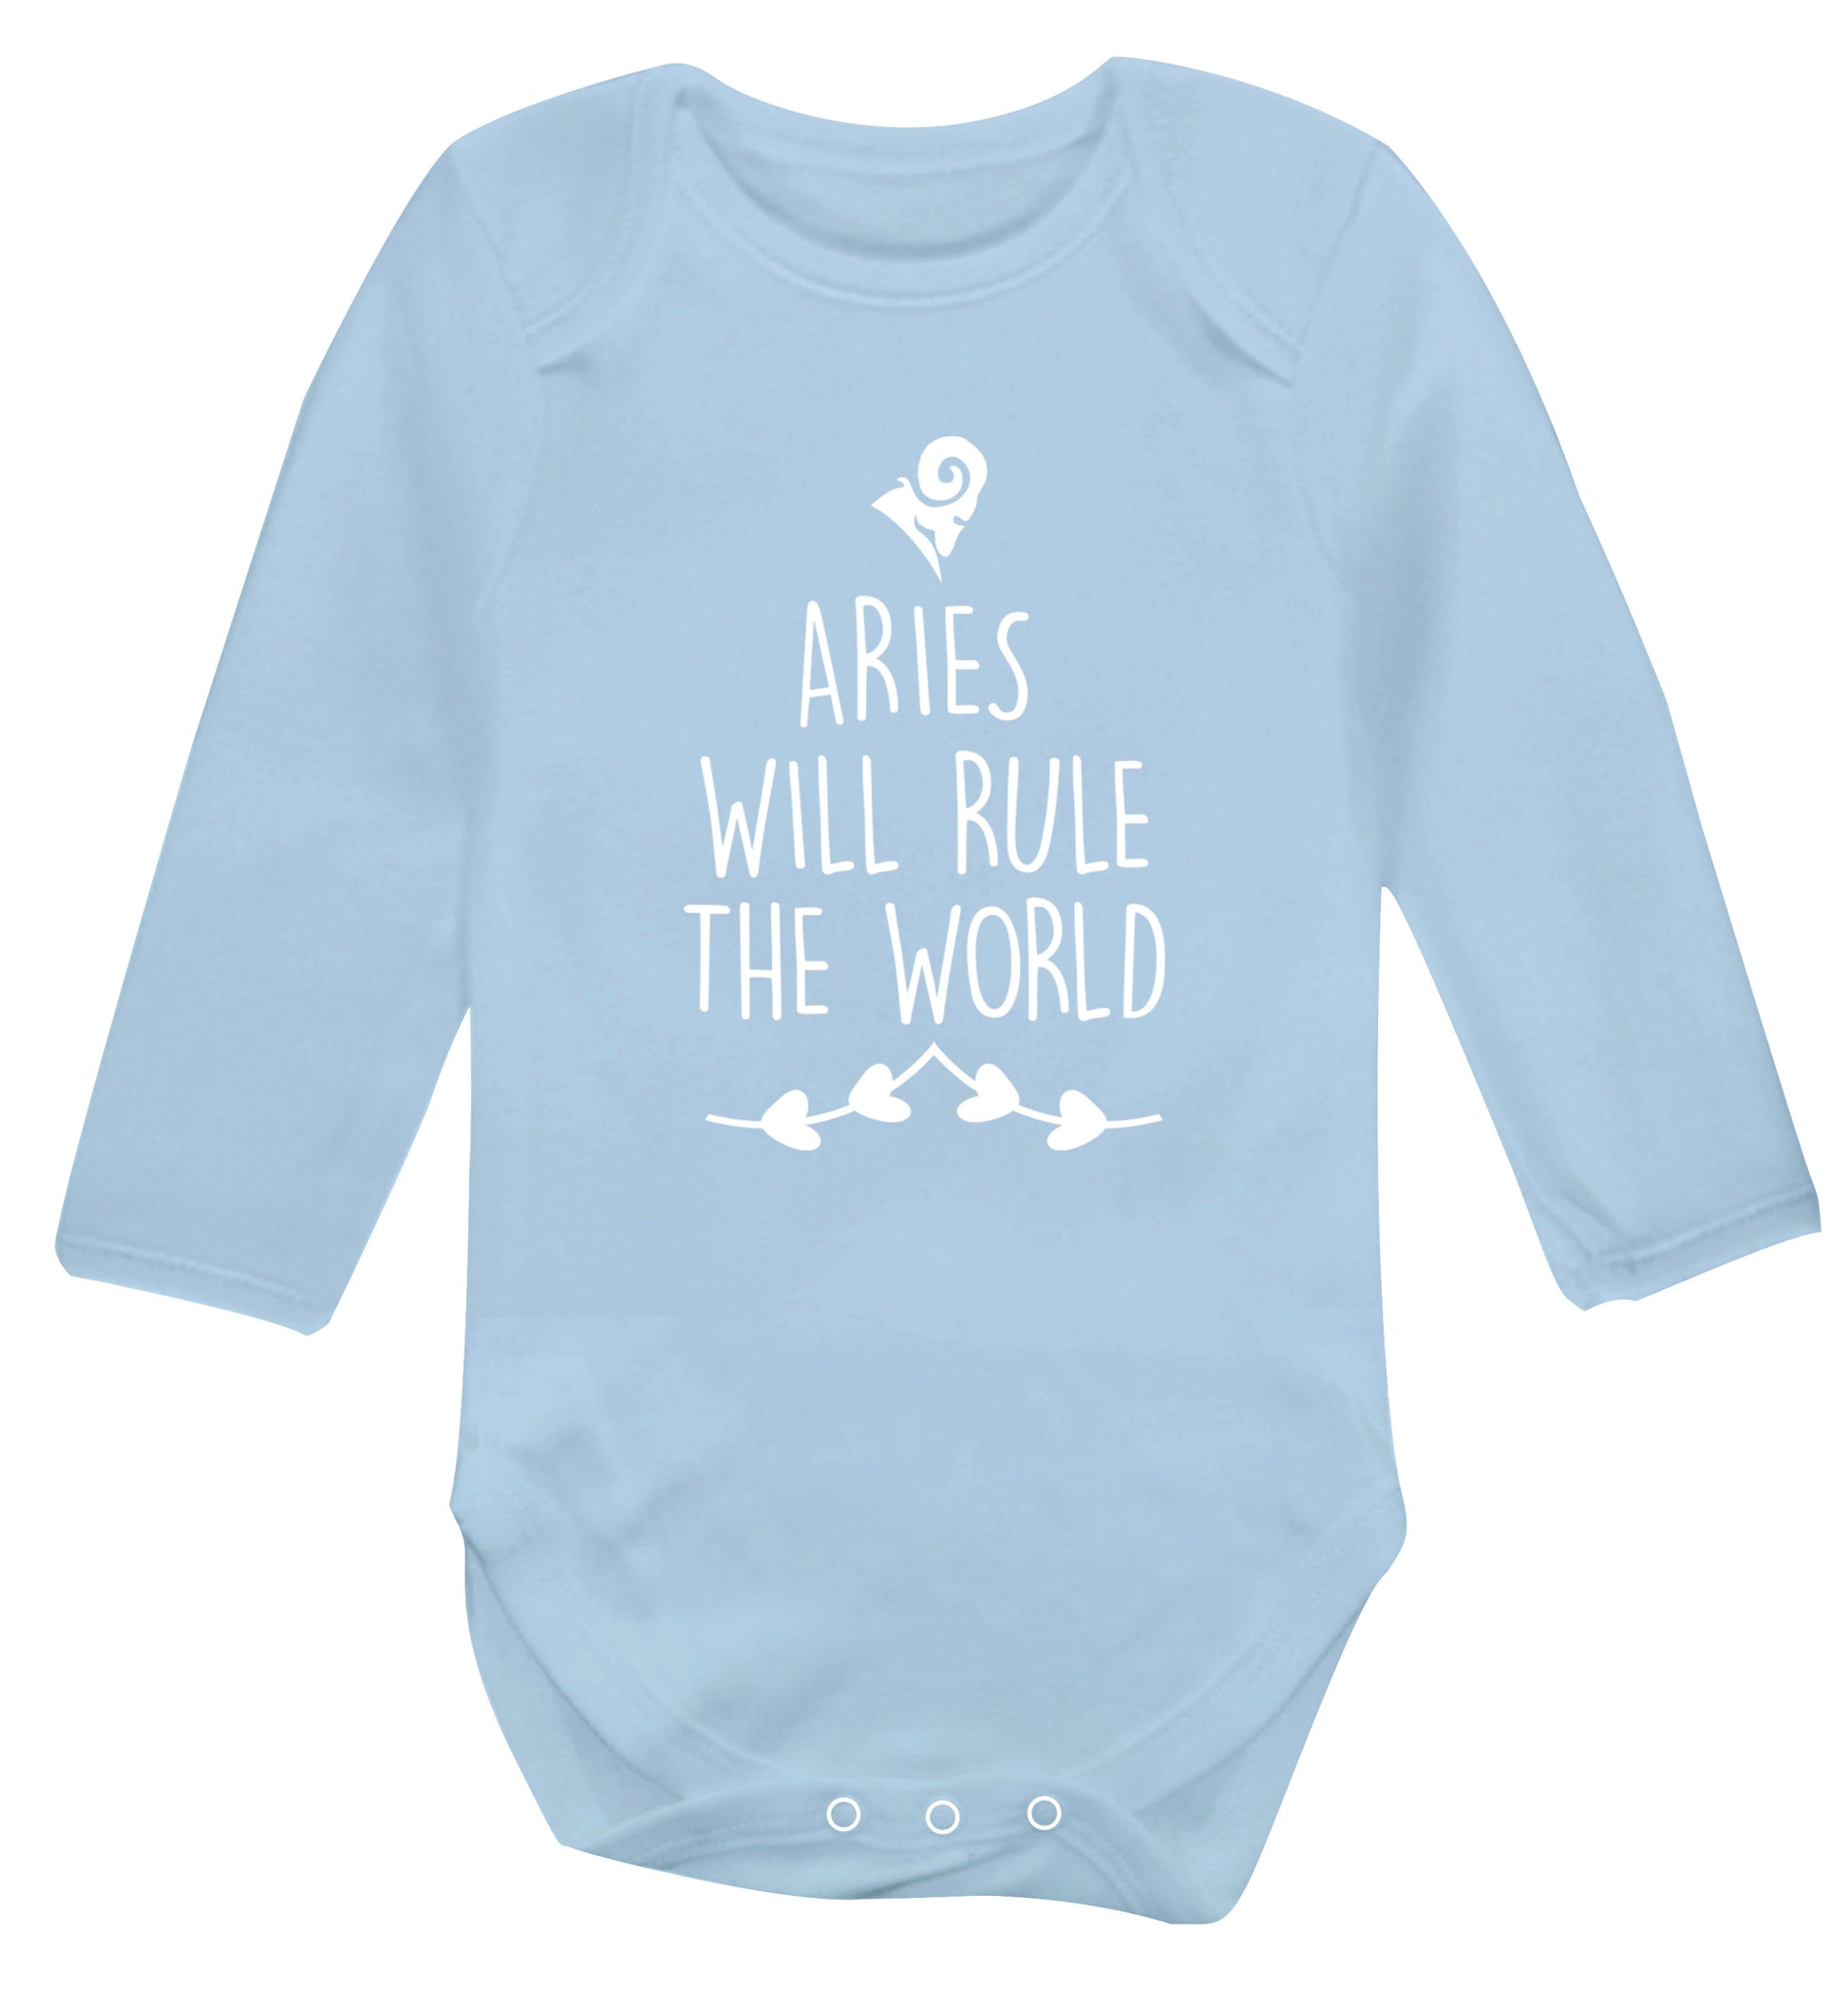 Aries will rule the world Baby Vest long sleeved pale blue 6-12 months